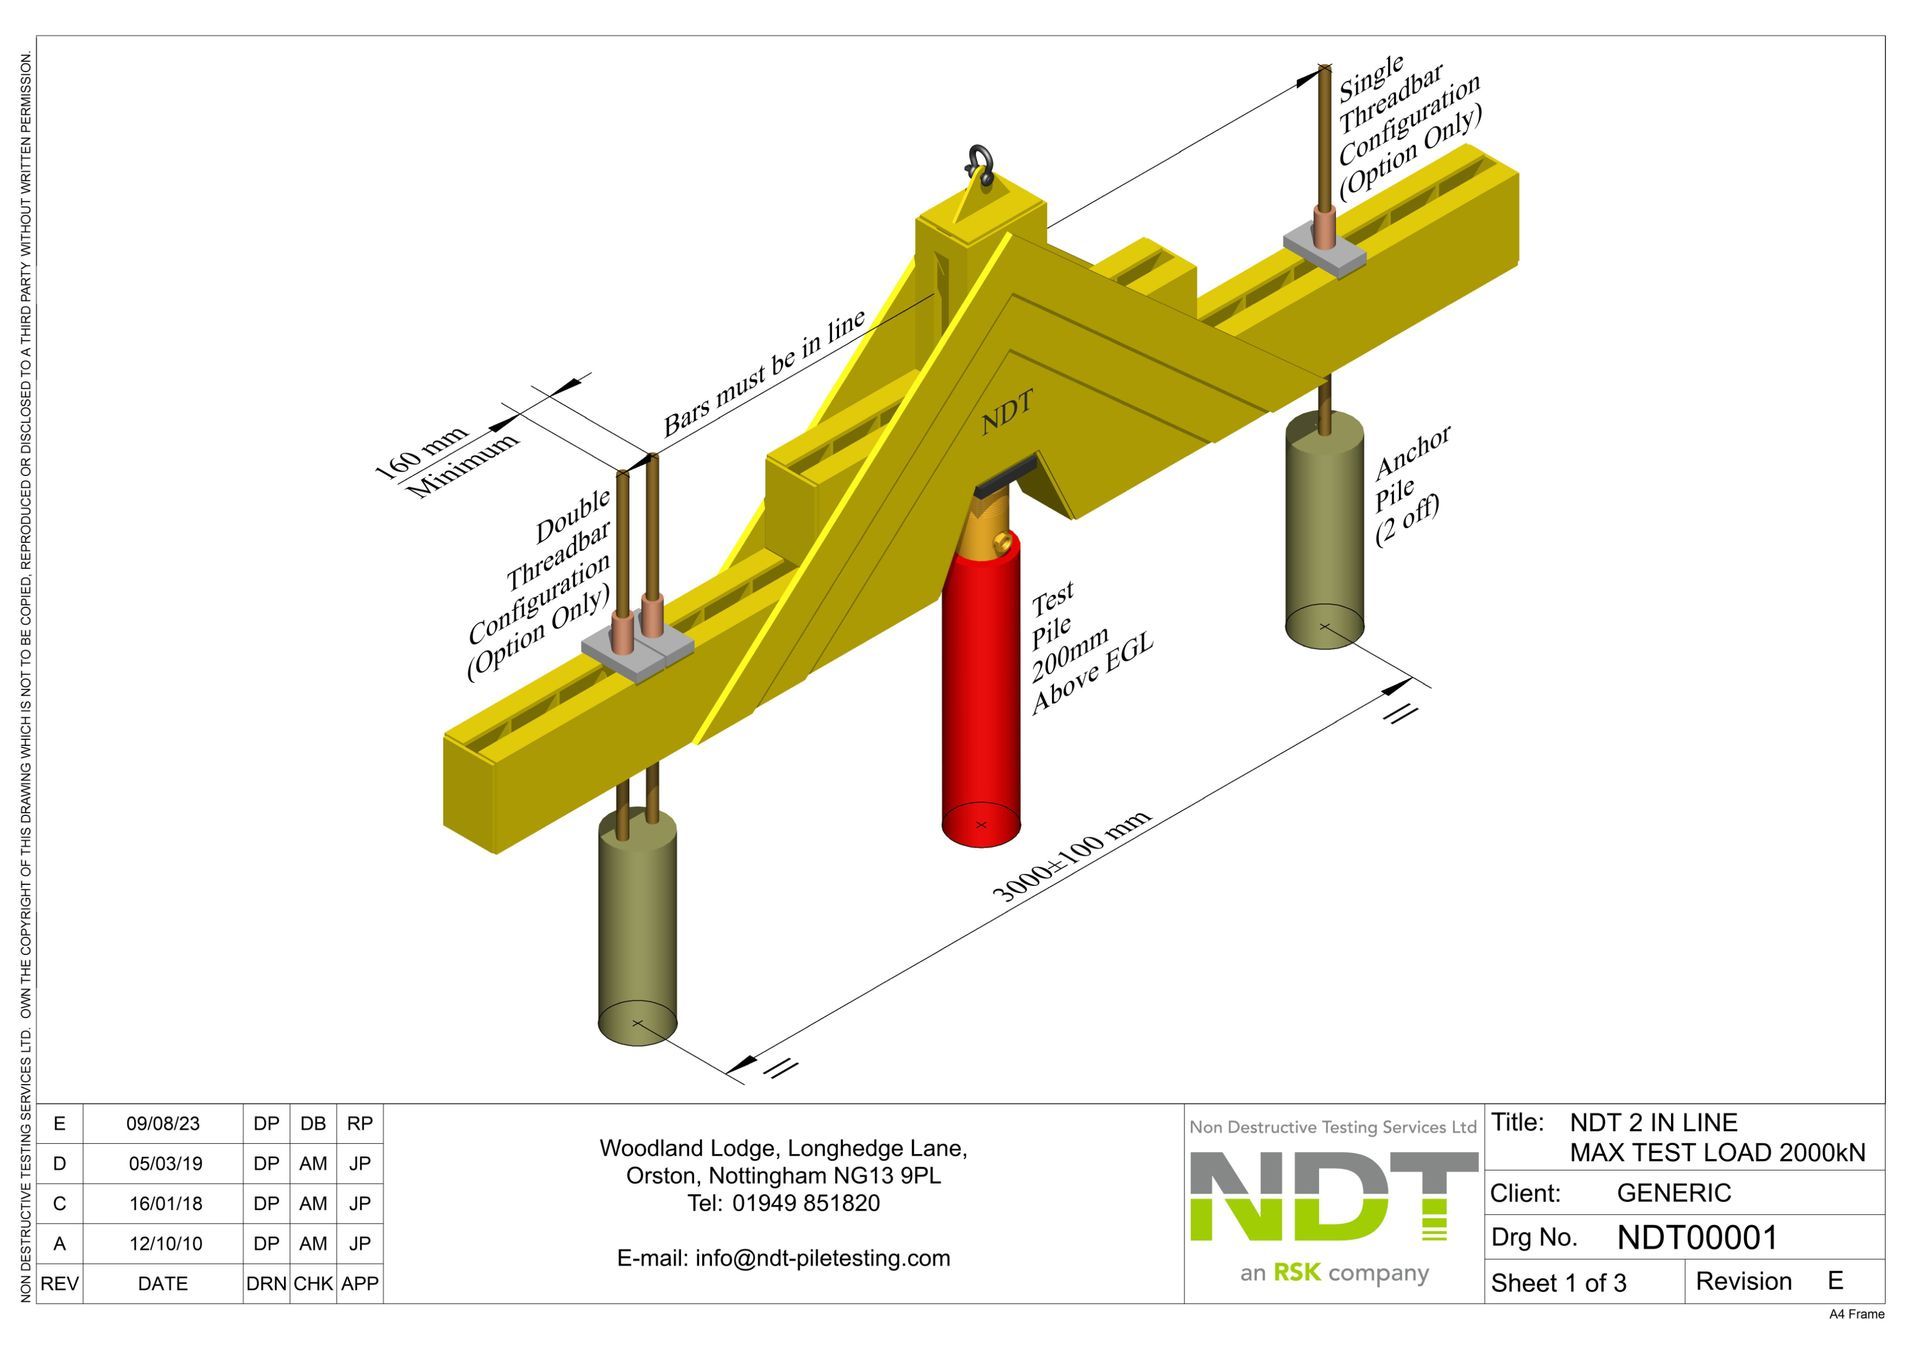 NDT00001 2 In-line Pile Layout (2000kN)